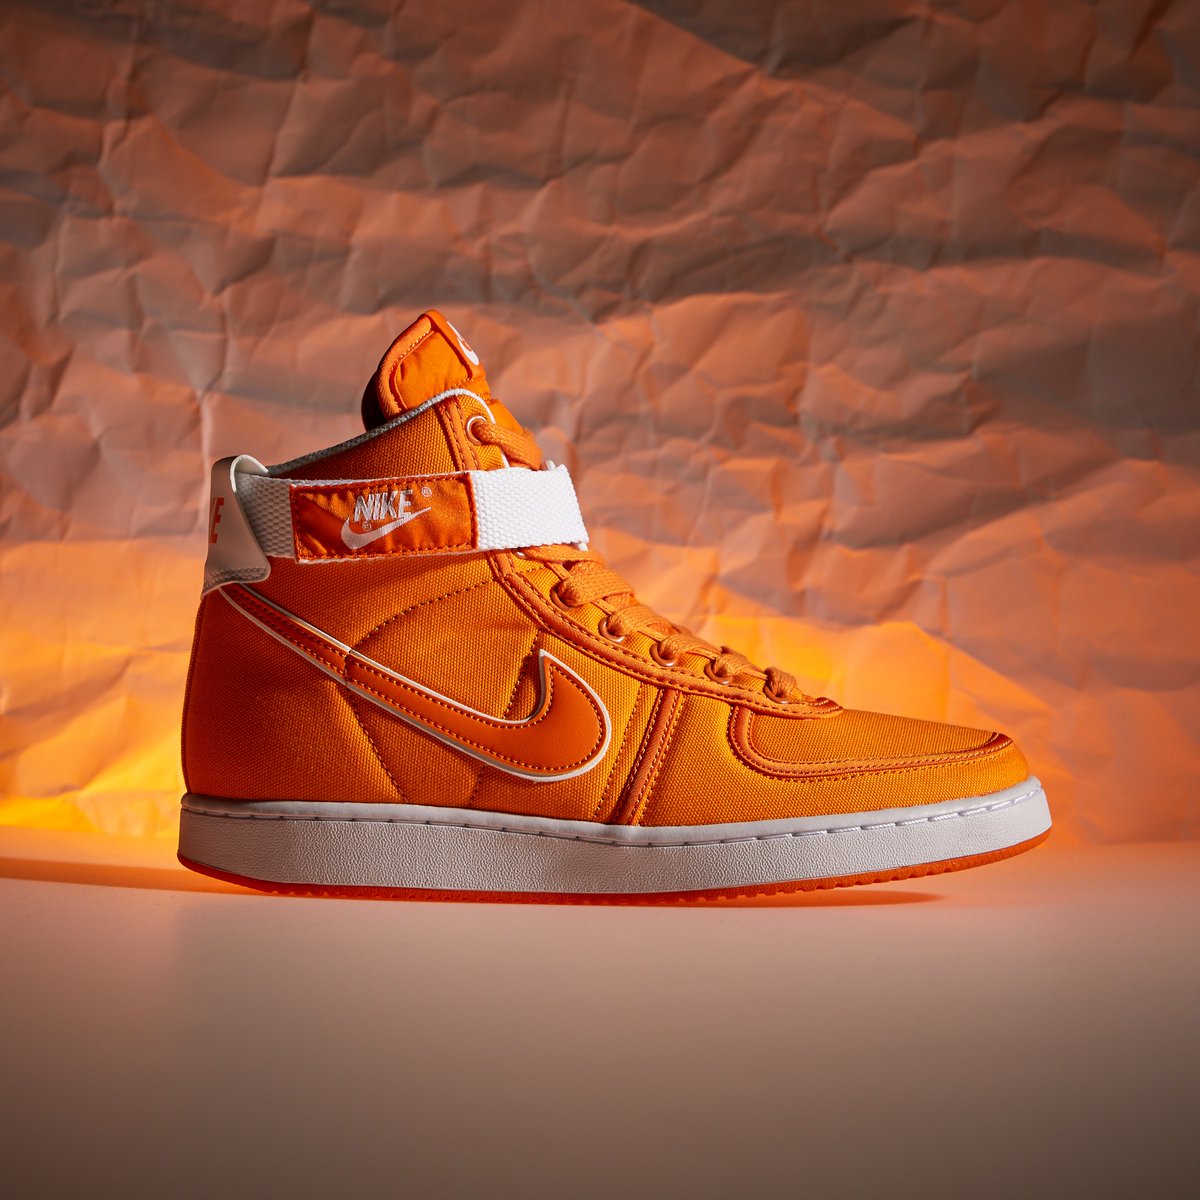 Doc Brown's Nike Vandal High Supreme's Are Releasing this Weekend